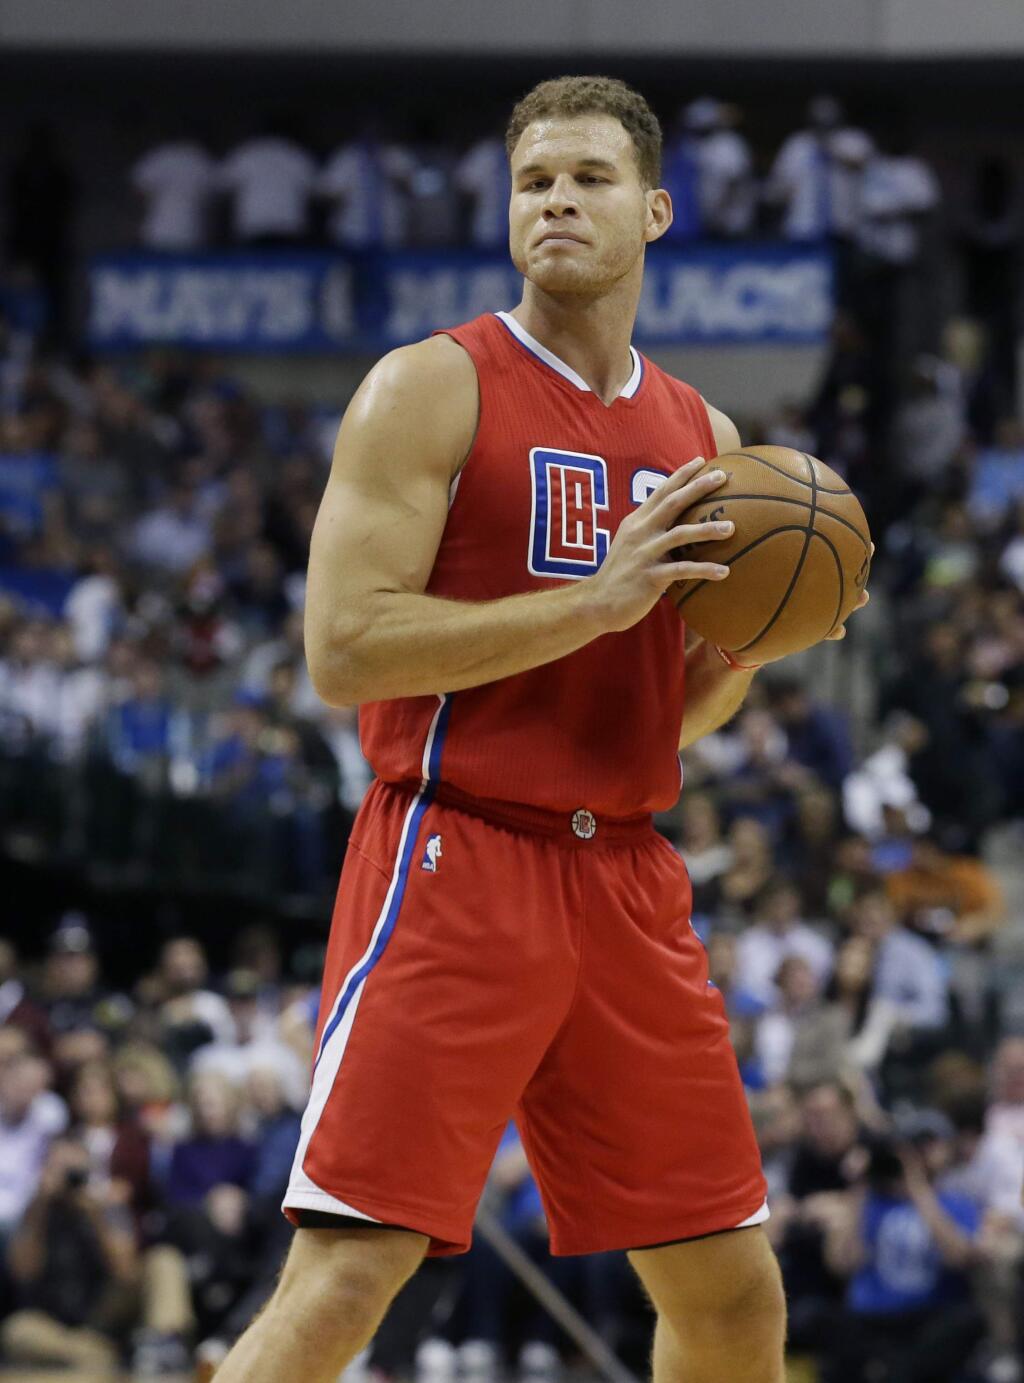 Los Angeles Clippers forward Blake Griffin (32) looks to pass during the first half of an NBA basketball game against the Dallas Mavericks Wednesday, Nov. 11, 2015, in Dallas. (AP Photo/LM Otero)